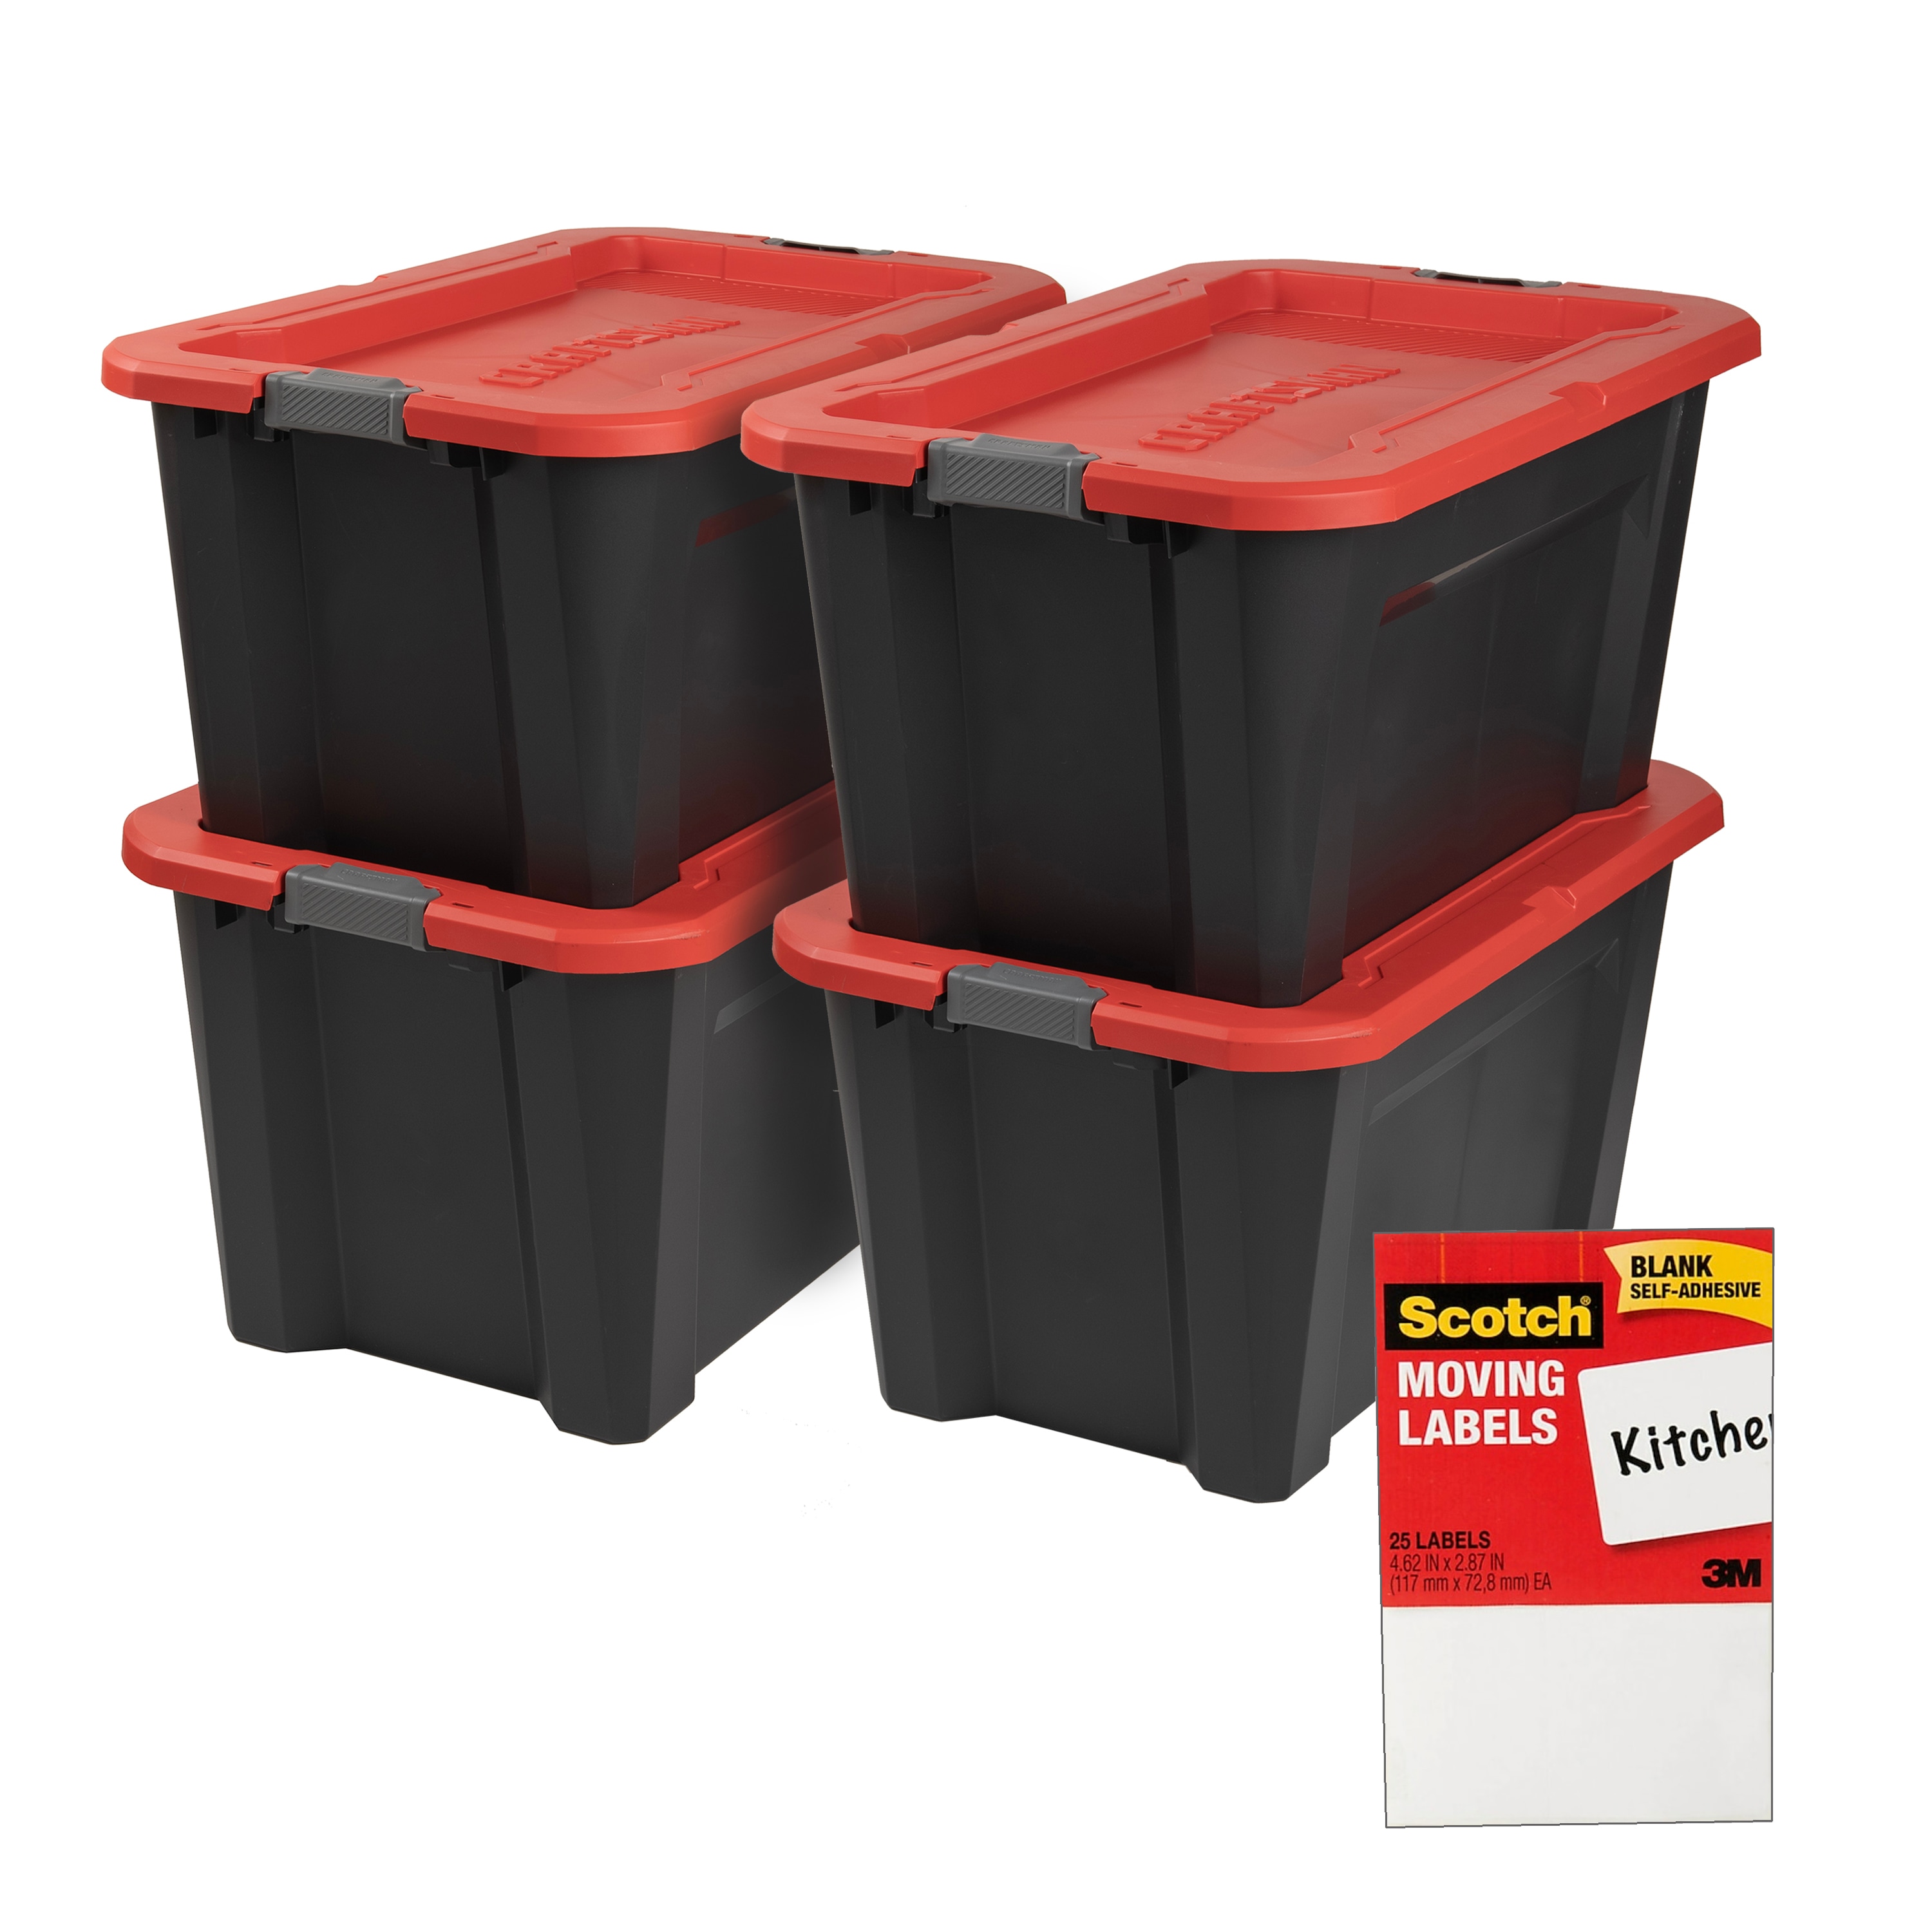 How to pack plastic bins for moving